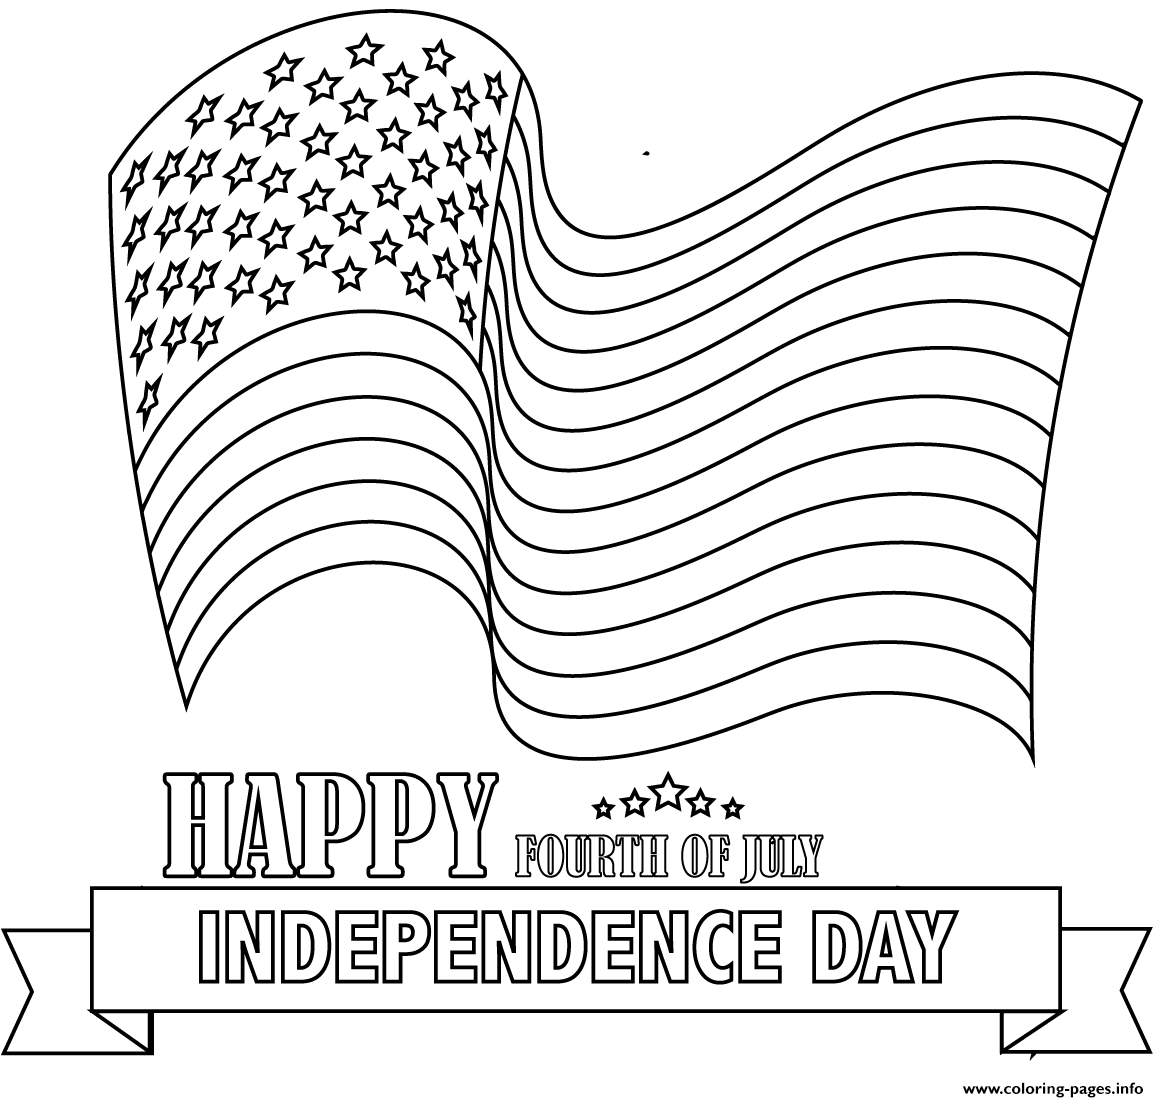 Happy Fourth Of July coloring